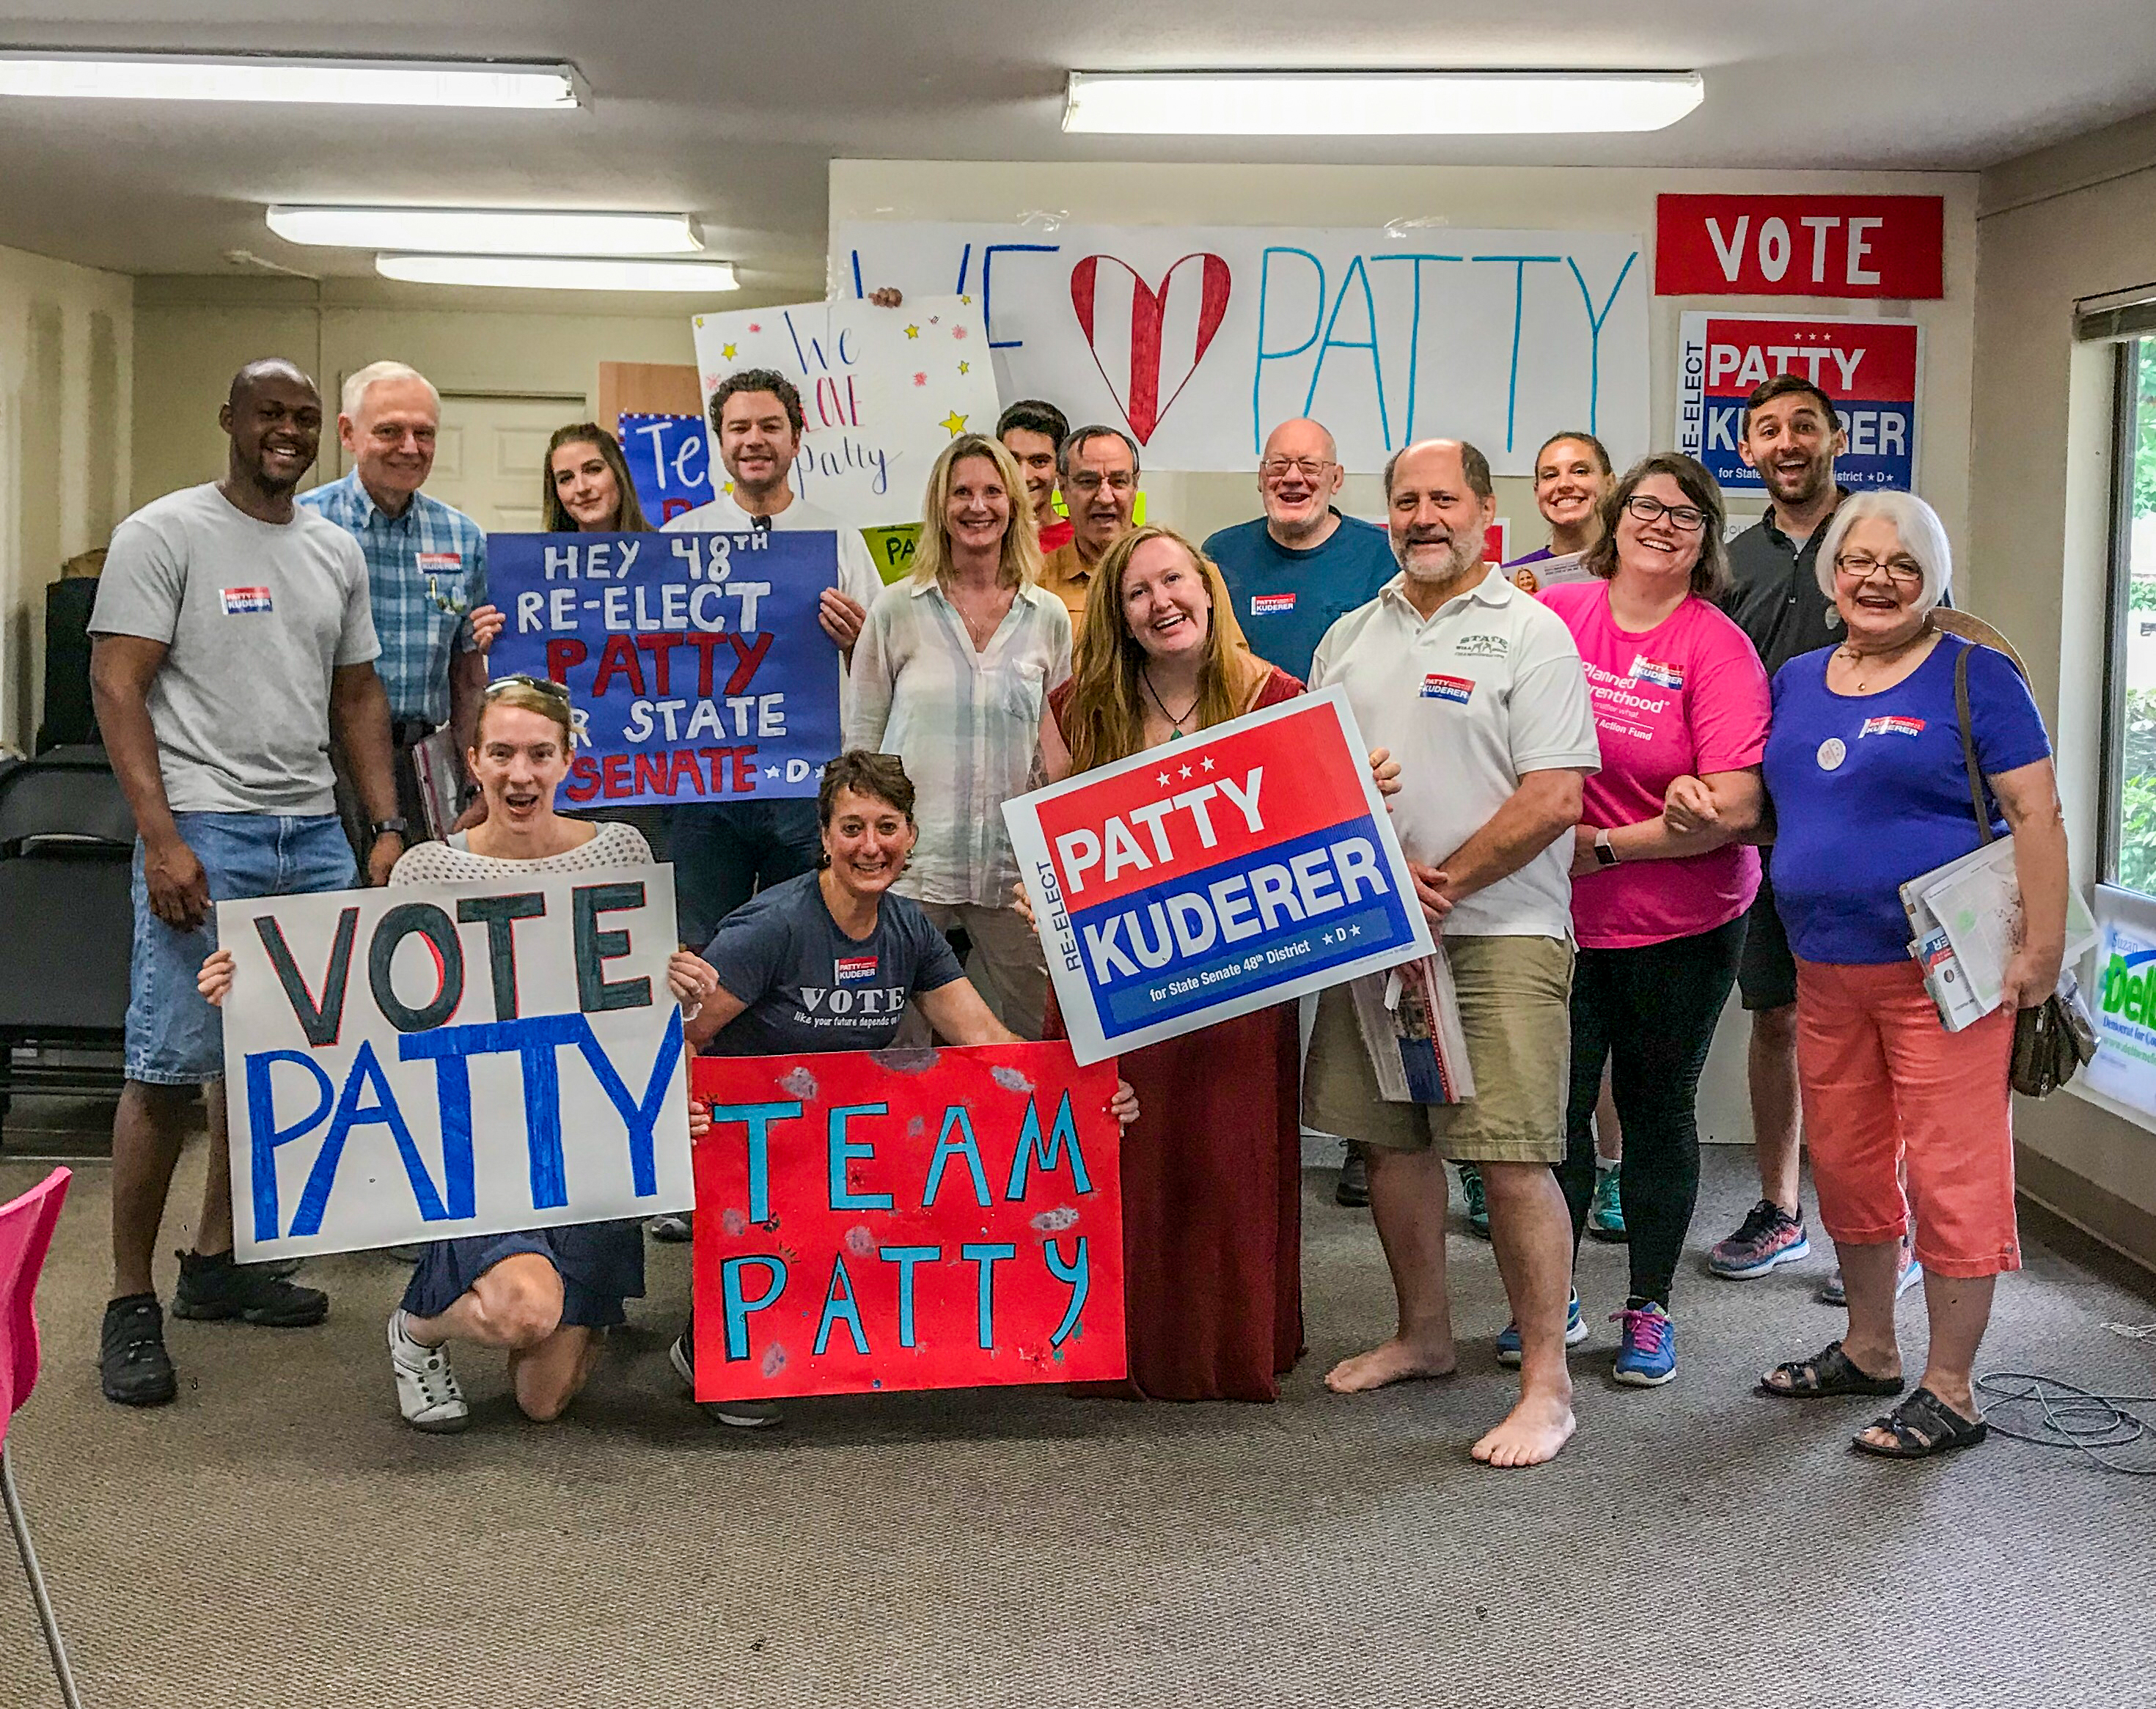 Fuse staff, board members, and volunteers canvassing for Sen. Patty Kuderer